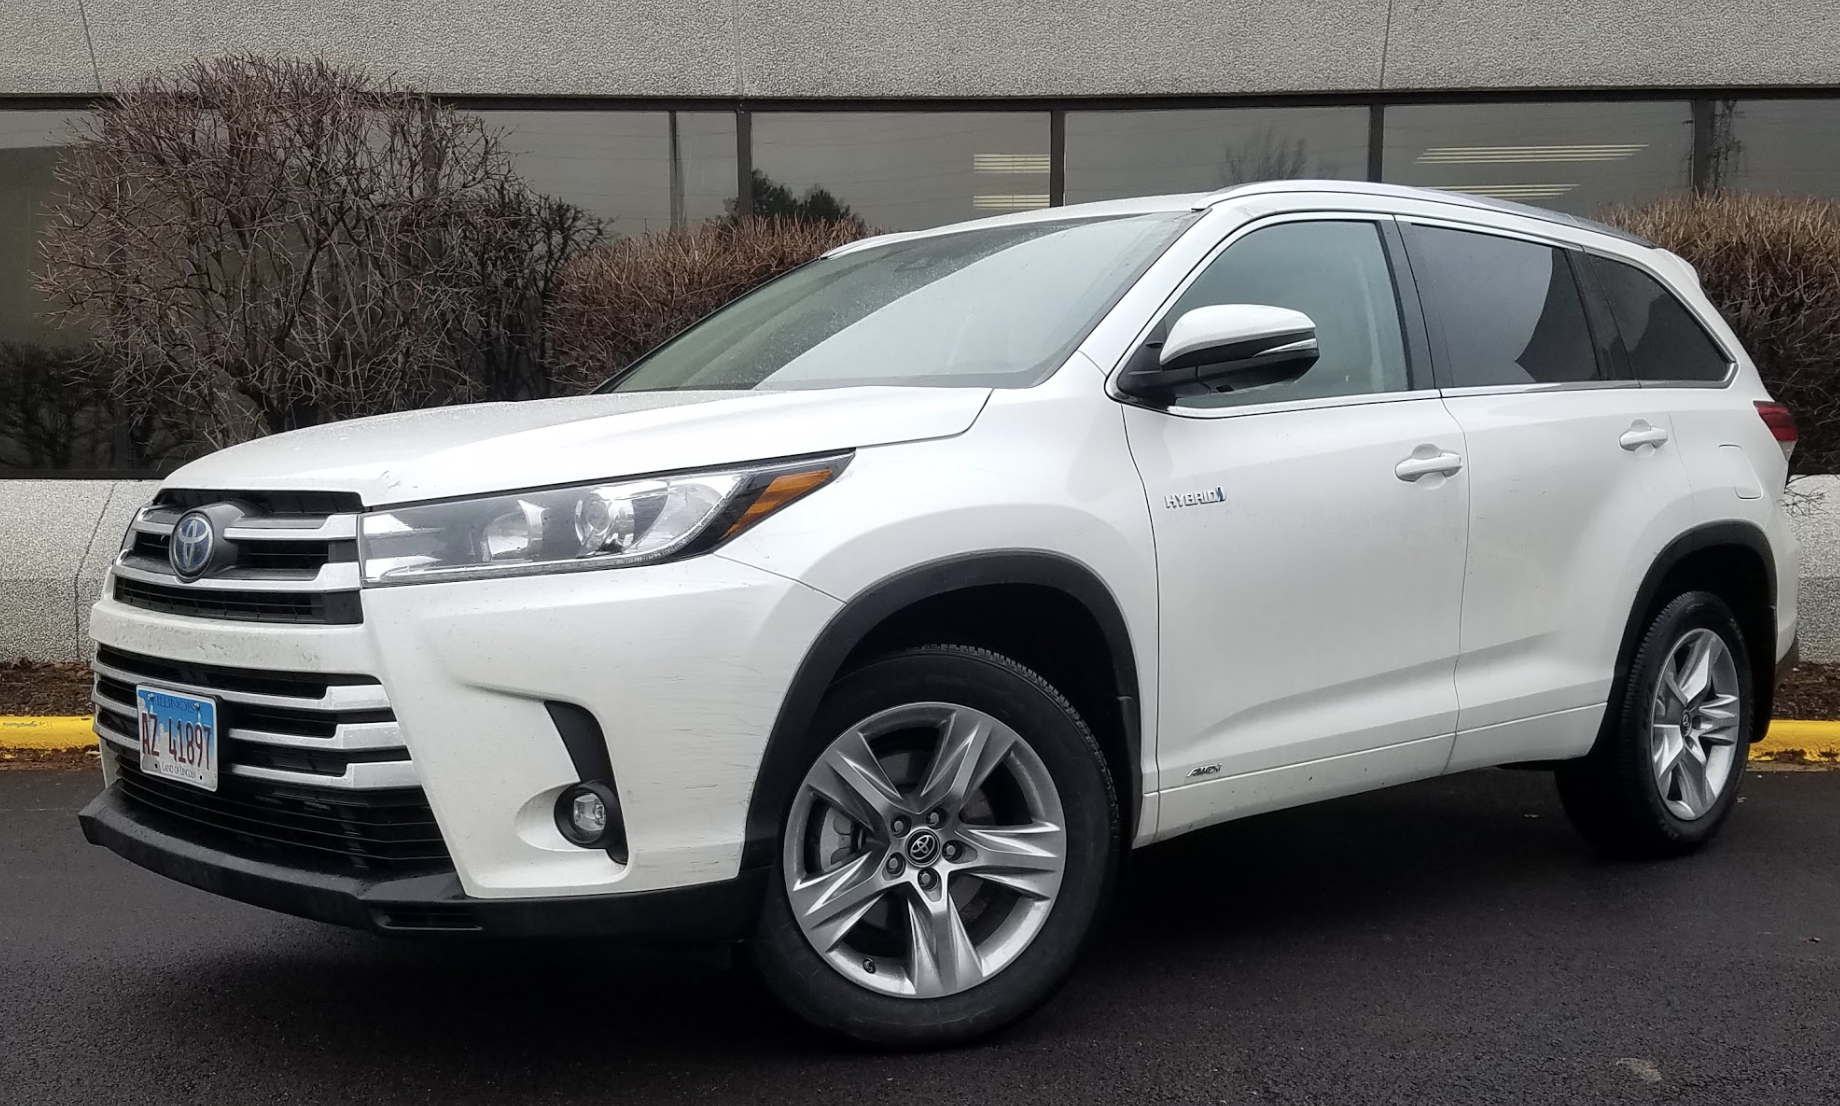 2019 Toyota Highlander Hybrid The Daily Drive | Consumer Guide®